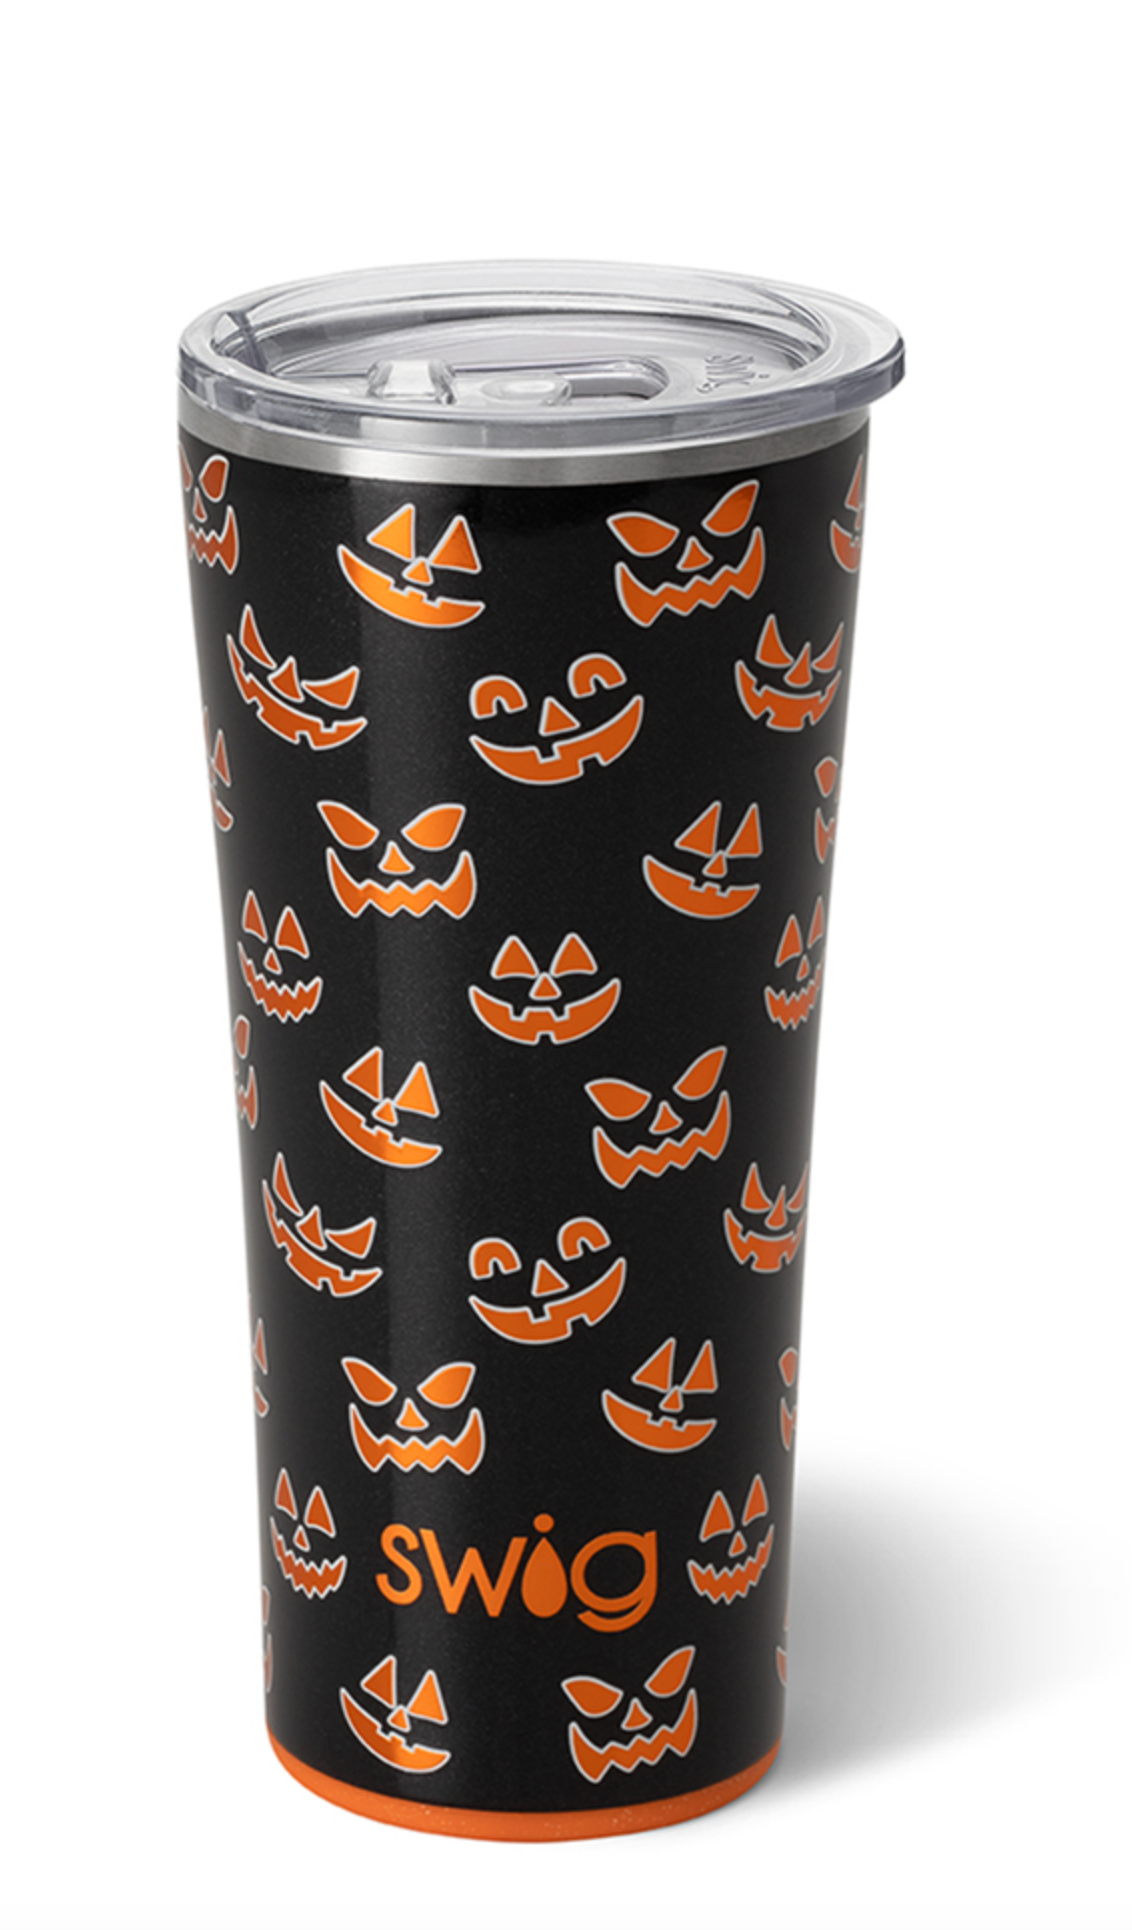 Swig 22oz Tumbler - Jeepers Creepers Drinkware in  at Wrapsody